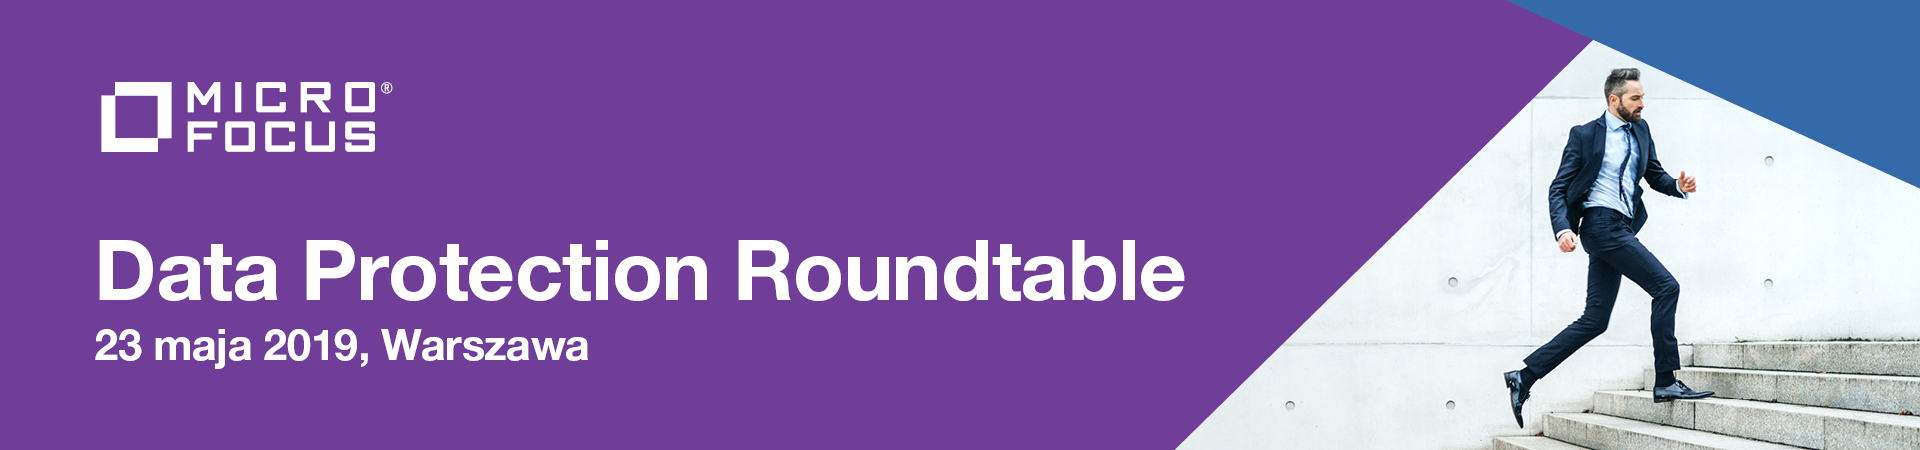 Data Protection Roundtable